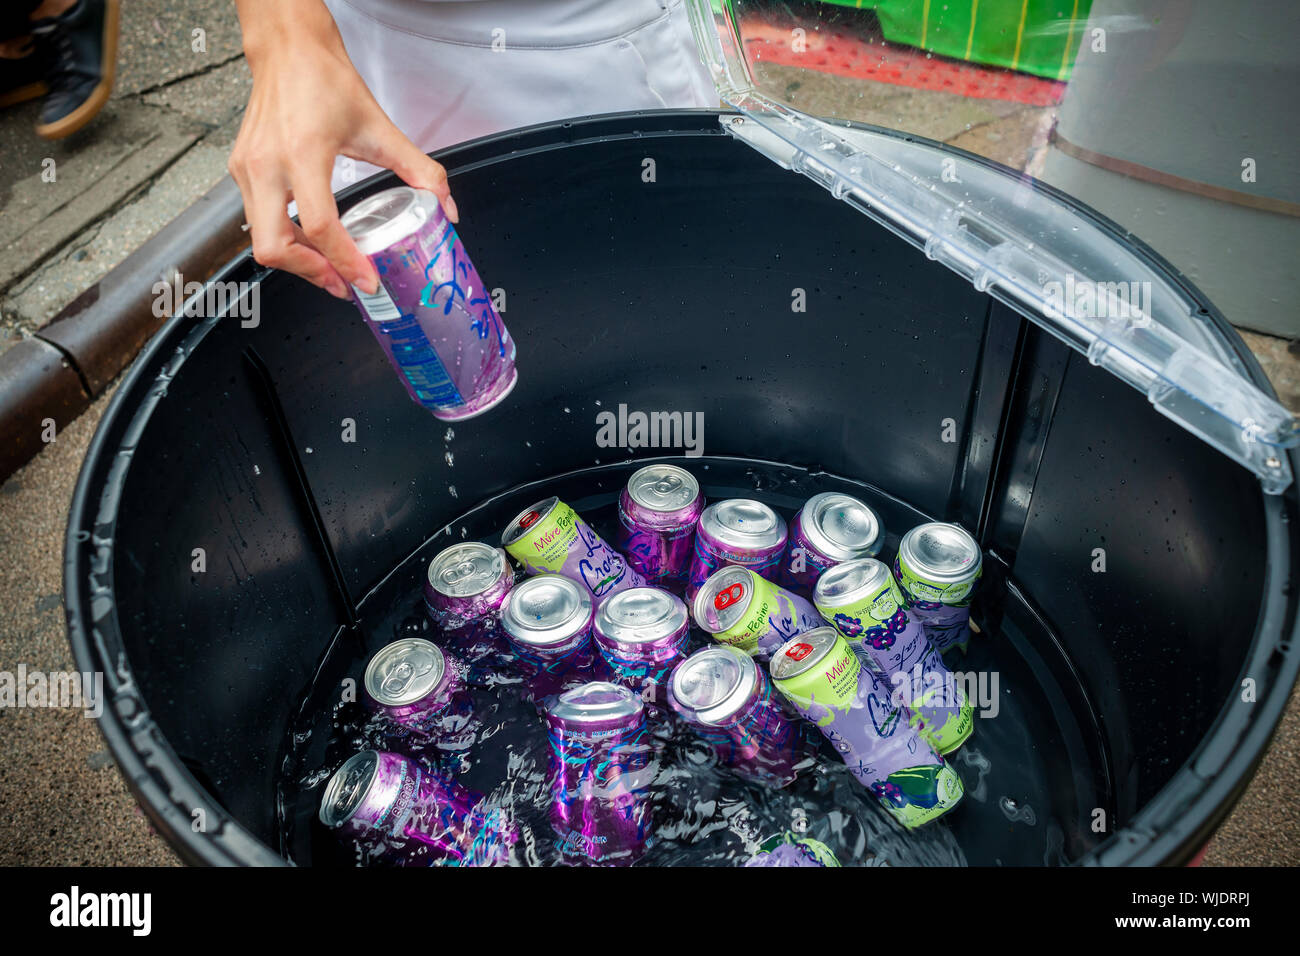 Workers distribute free cans of LaCroix sparkling water’s new flavors at a branding event in the Flatiron neighborhood of New York on Friday, August 23, 2019. Once the darling of millennials, sales of National Beverage Corp.’s LaCroix have fallen precipitously as they face increased competition from “Big Soda”, i.e. Pepsi and Coca-Cola coming out with similar brands. (© Richard B. Levine) Stock Photo